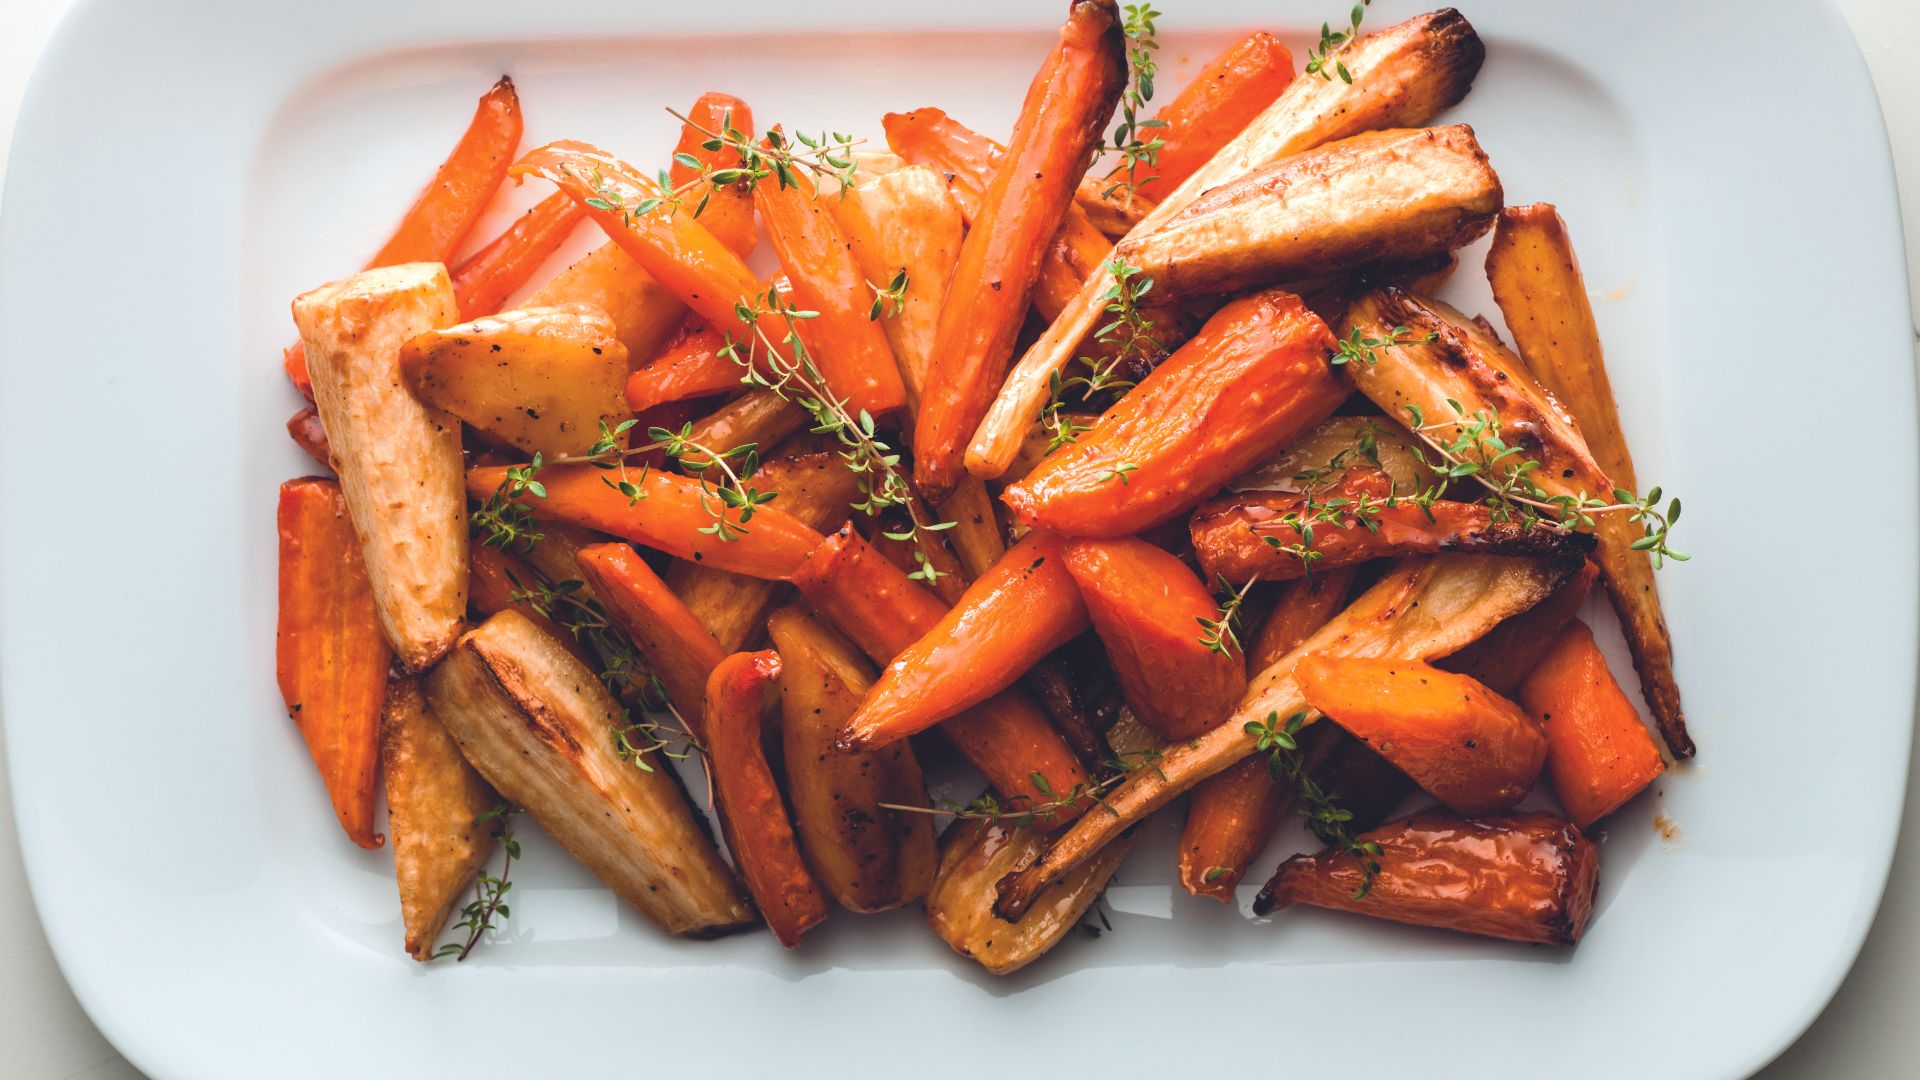 Roasted Parsnips and Carrots in Caramel